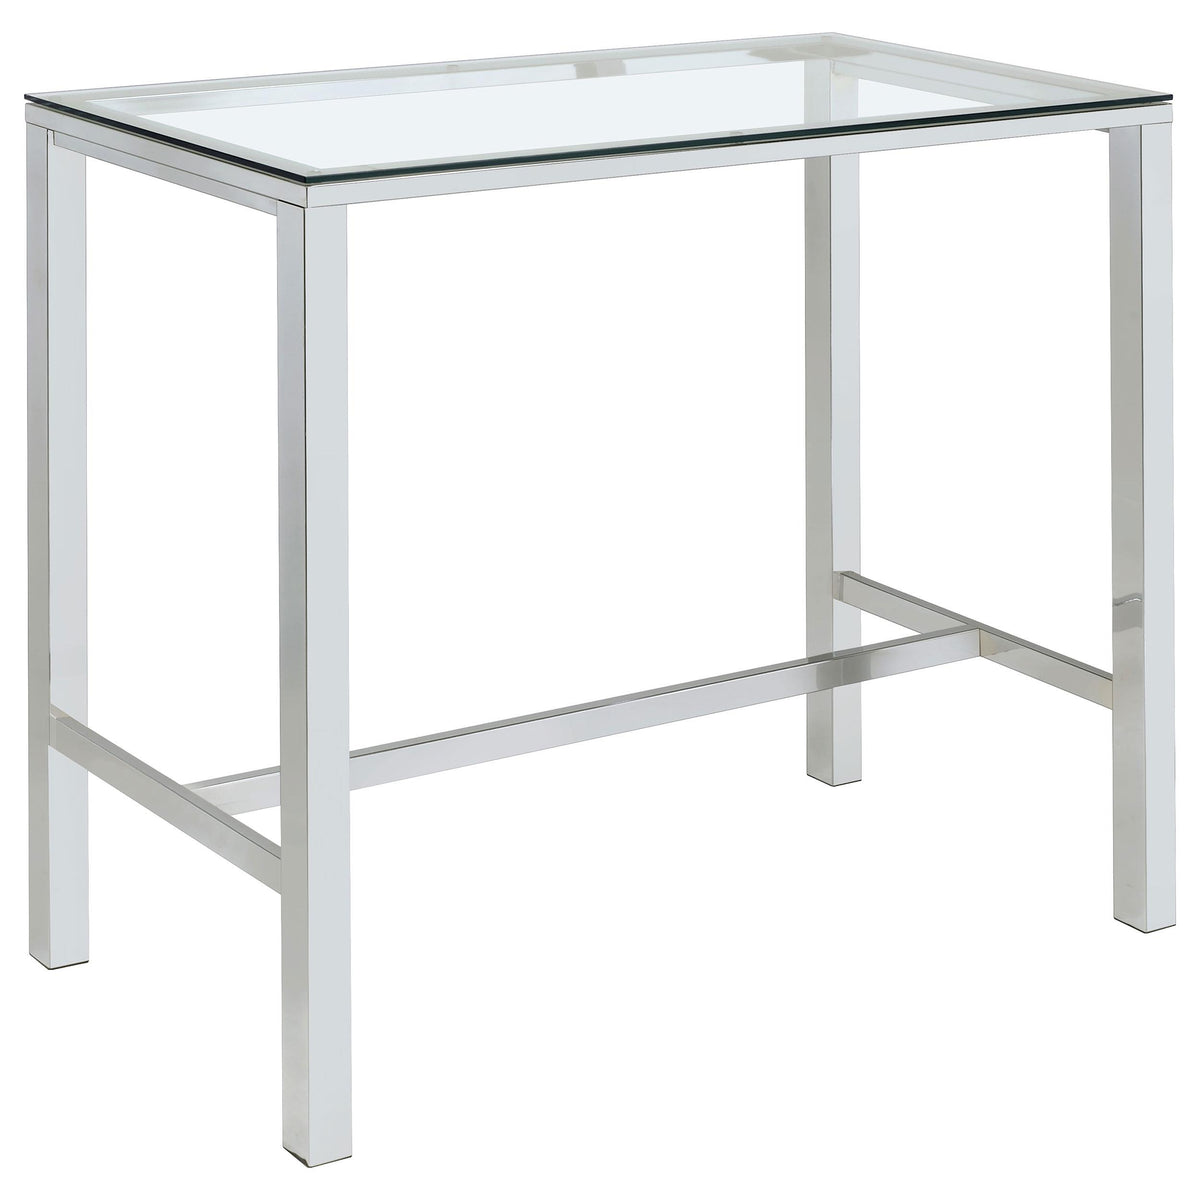 Tolbert Bar Table with Glass Top Chrome  Las Vegas Furniture Stores